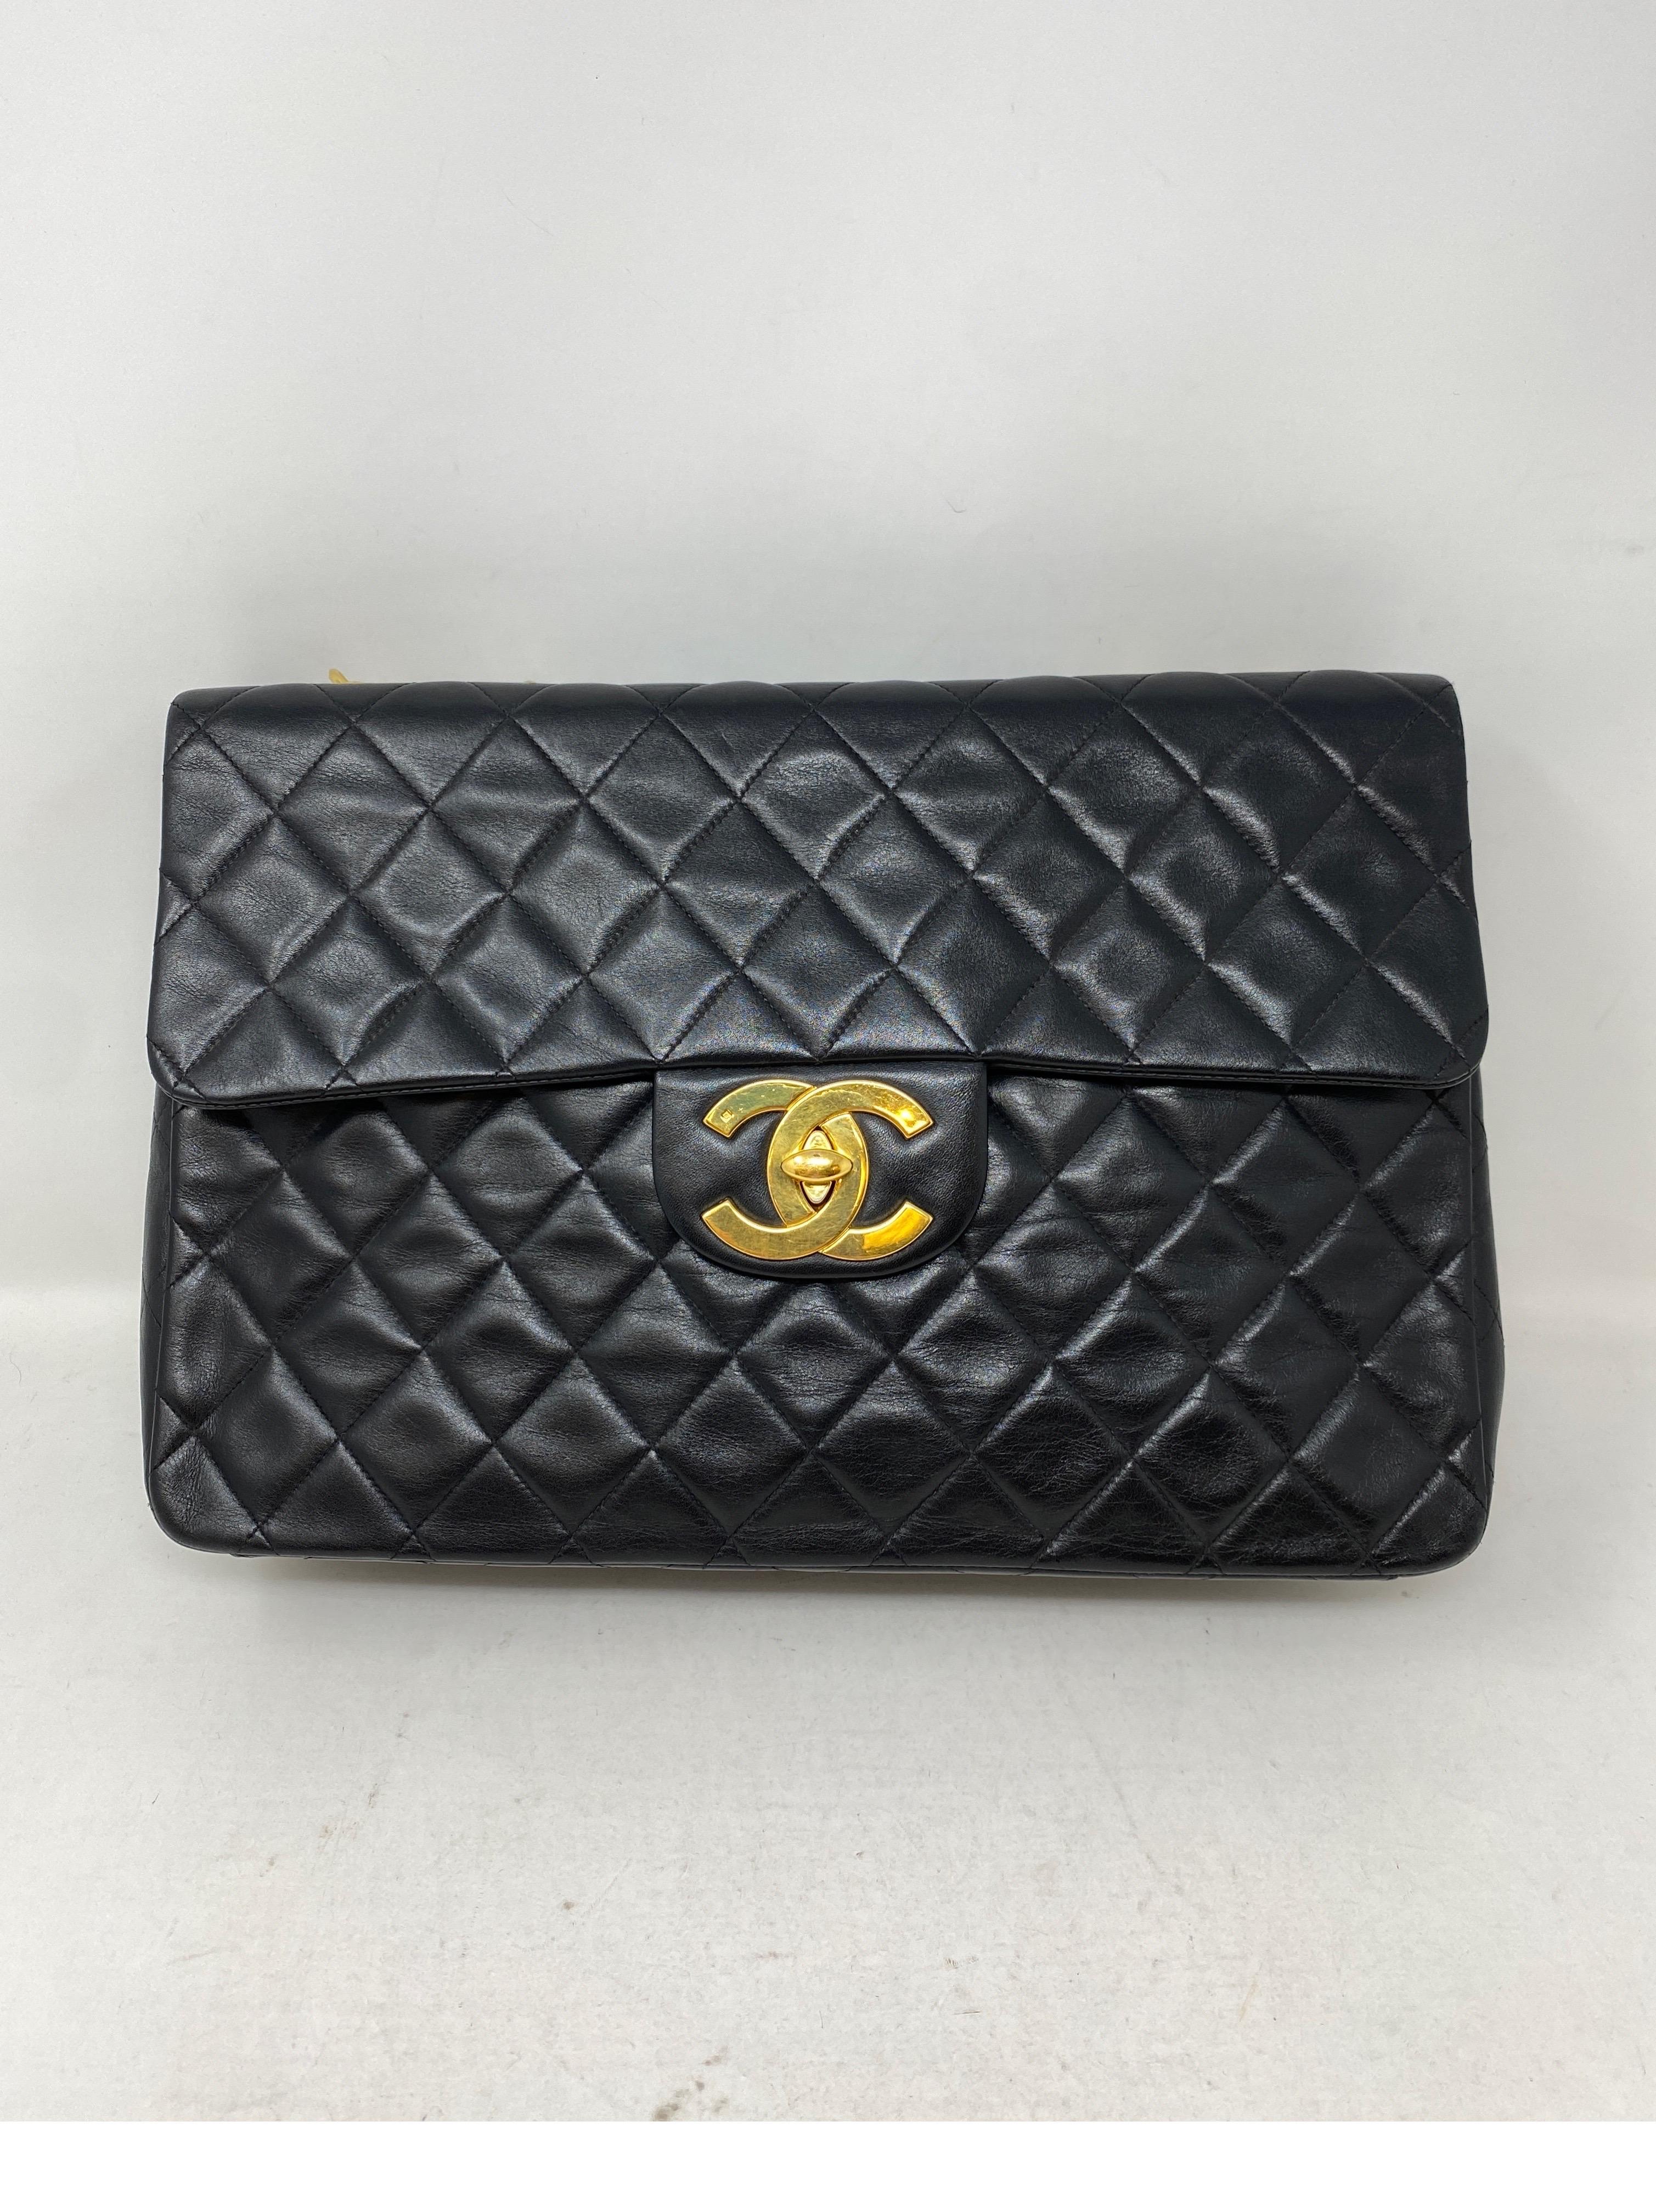 Chanel Black Vintage Maxi Bag. Karl Lagerfeld designed big CC clasp. 24 kt gold plated hardware and chain. Iconic design. Black lambskin leather. Can be worn as a crossbody or as a shoulder bag. Beautiful Chanel bag. Great investment. Guaranteed